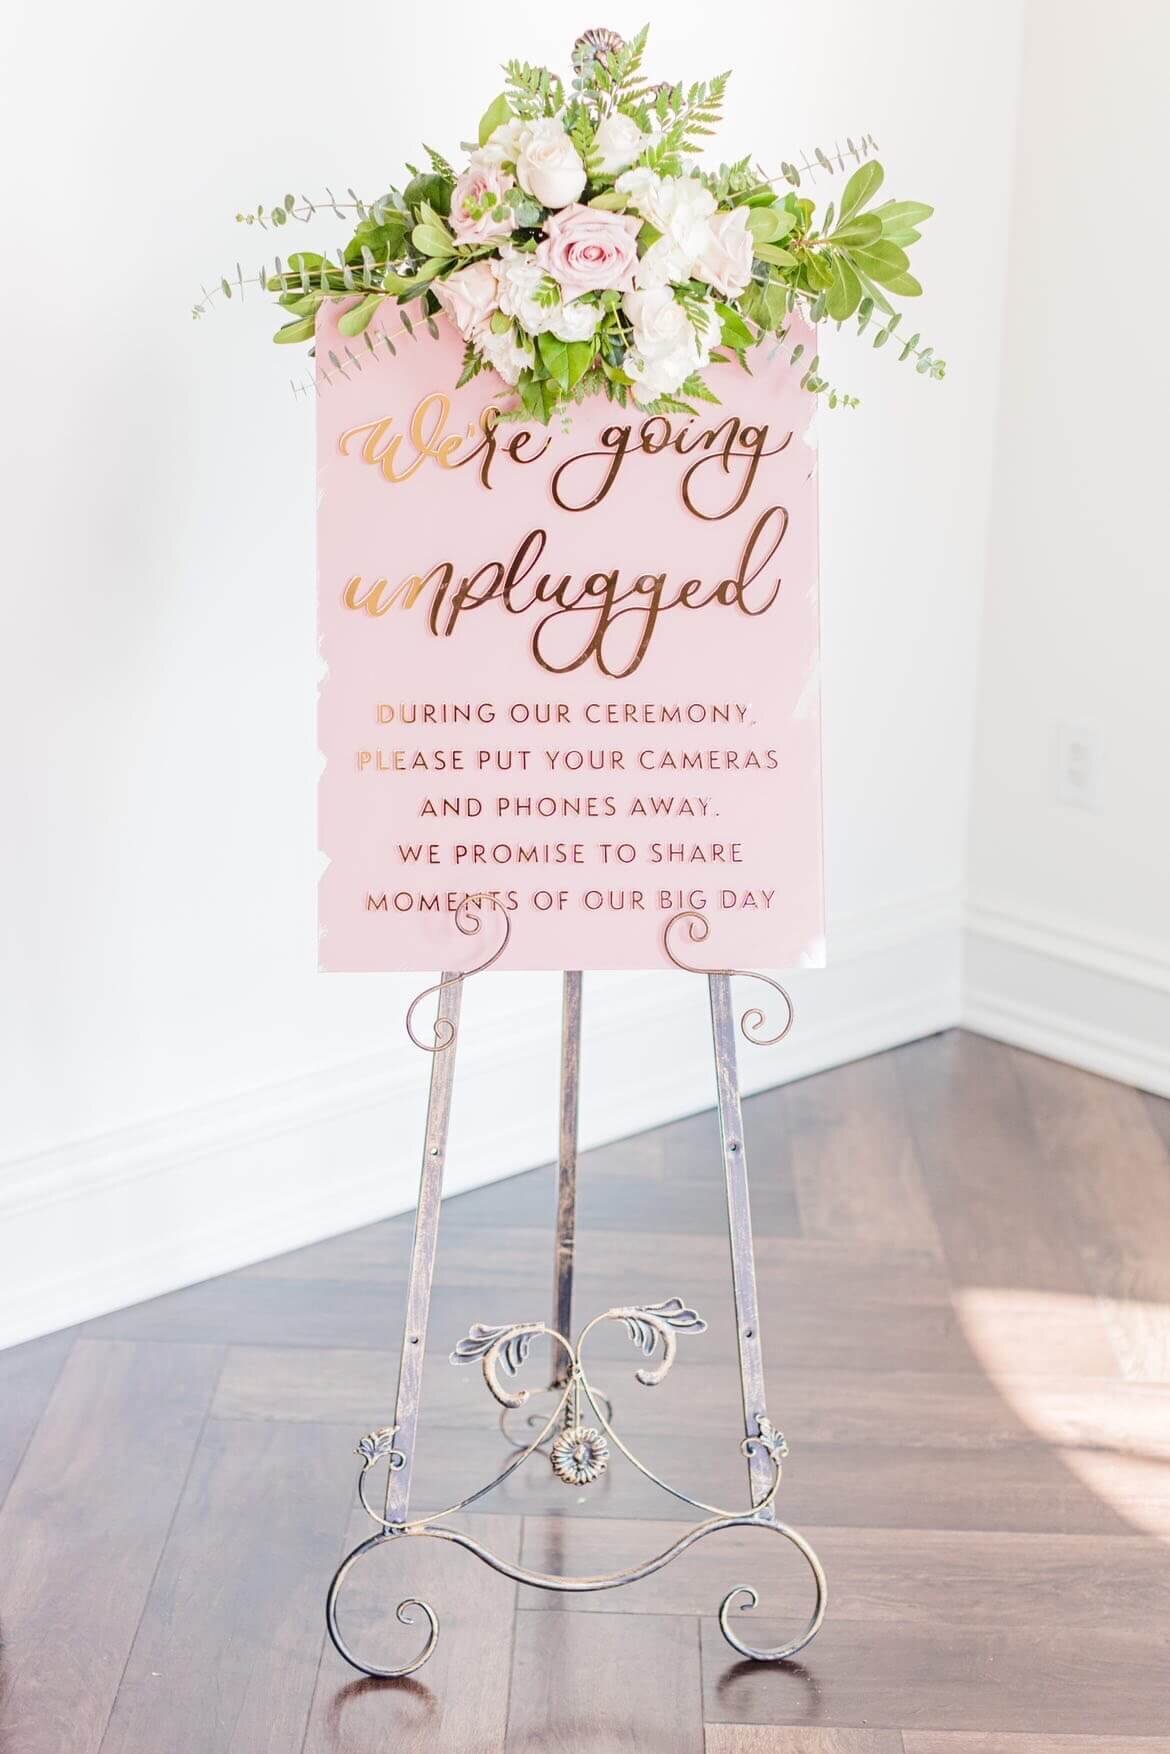 SGH Creative Luxury Wedding Signage & Stationery in New York & New Jersey - Full Gallery (13)